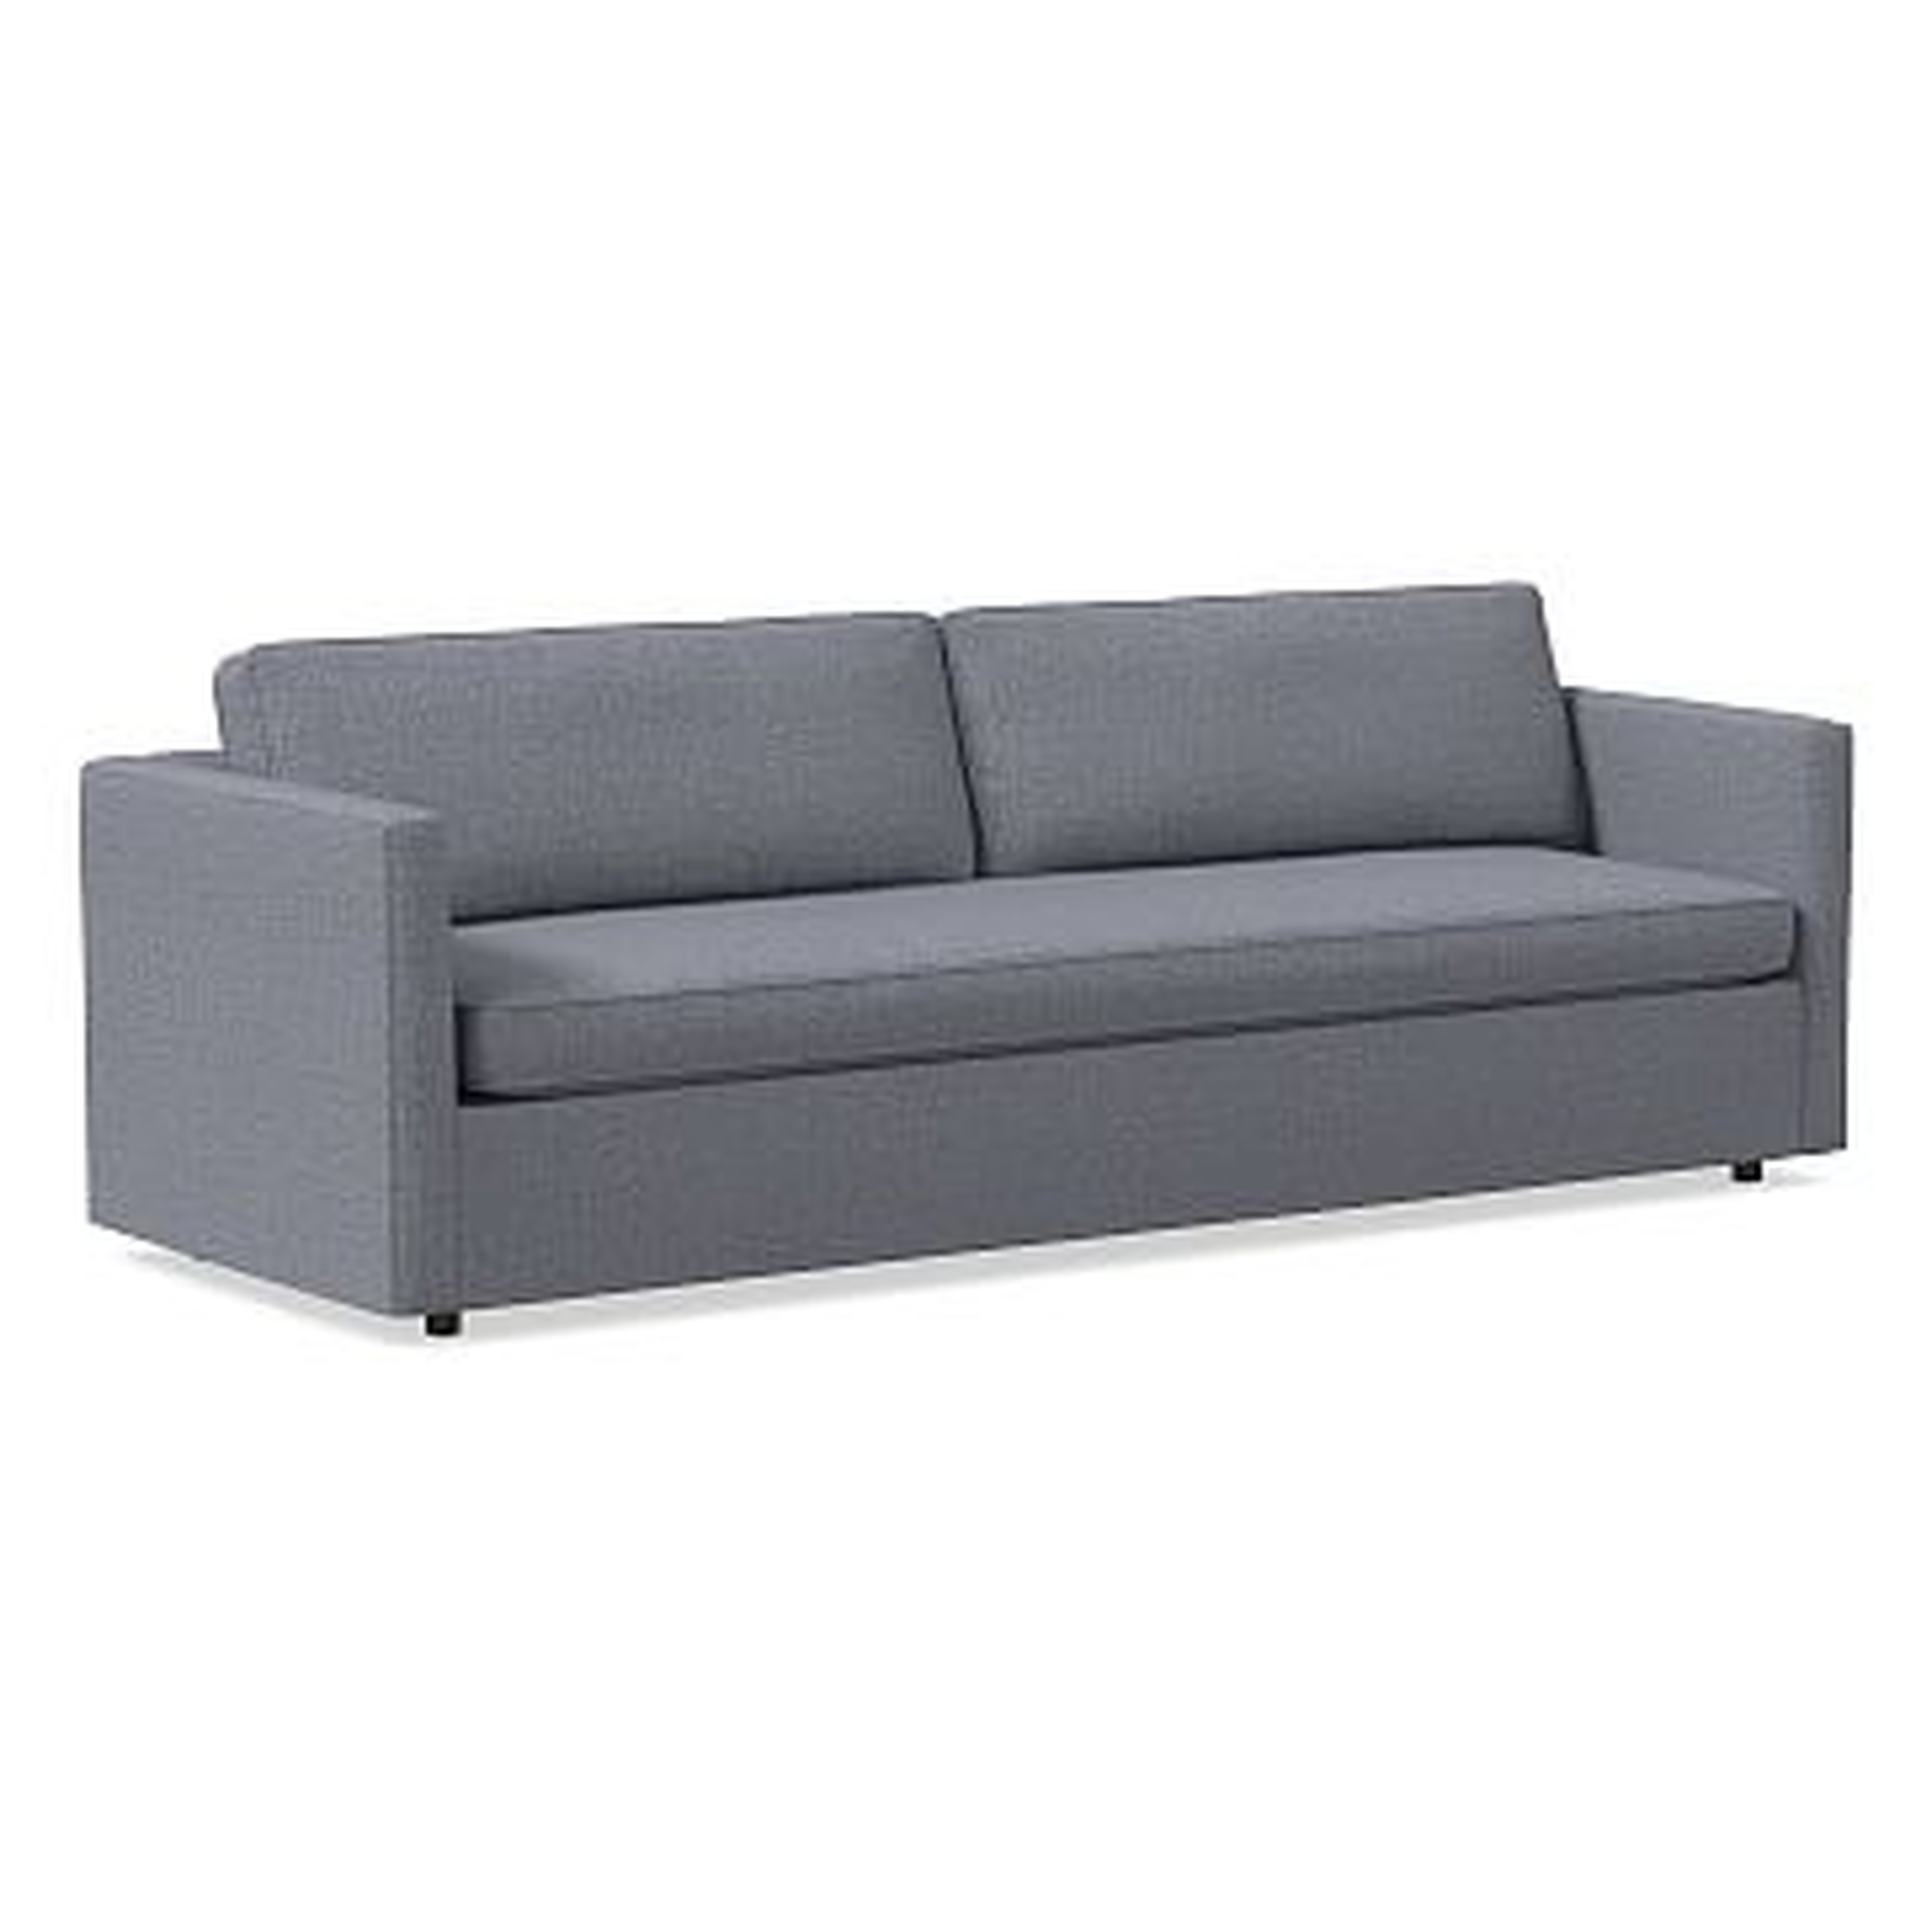 Harris Petite 96" Sofa Bench, Poly, Performance Yarn Dyed Linen Weave, Graphite, Concealed Supports - West Elm